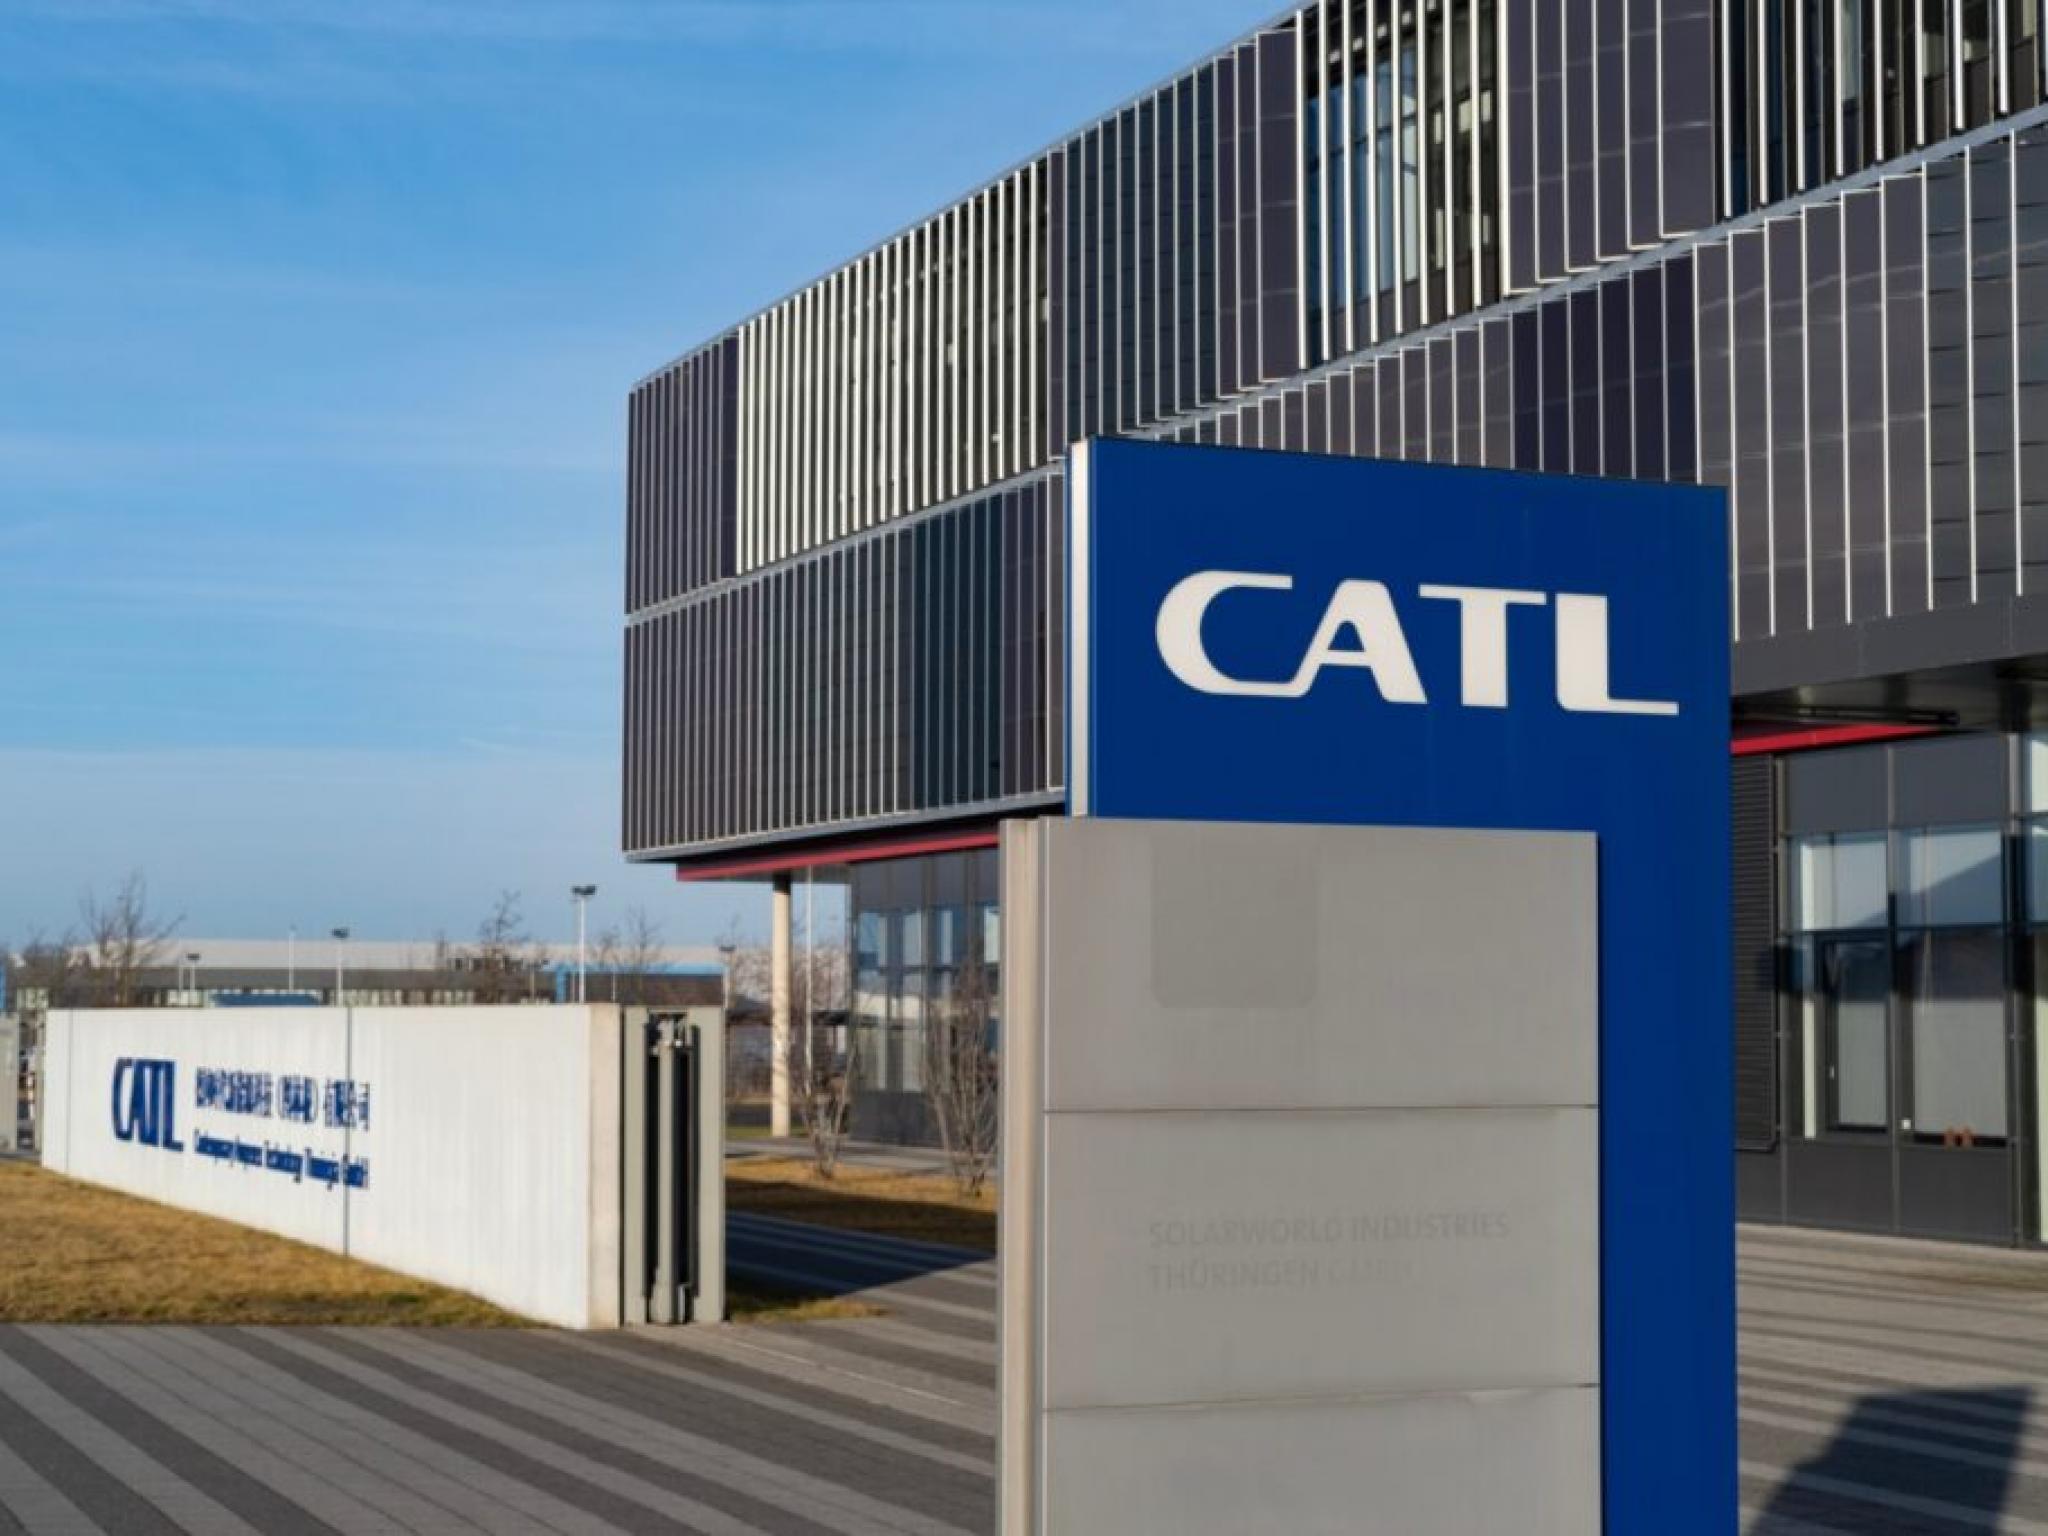  tesla-supplier-catl-seeks-15b-funding-to-expand-global-ev-battery-supply-chain 